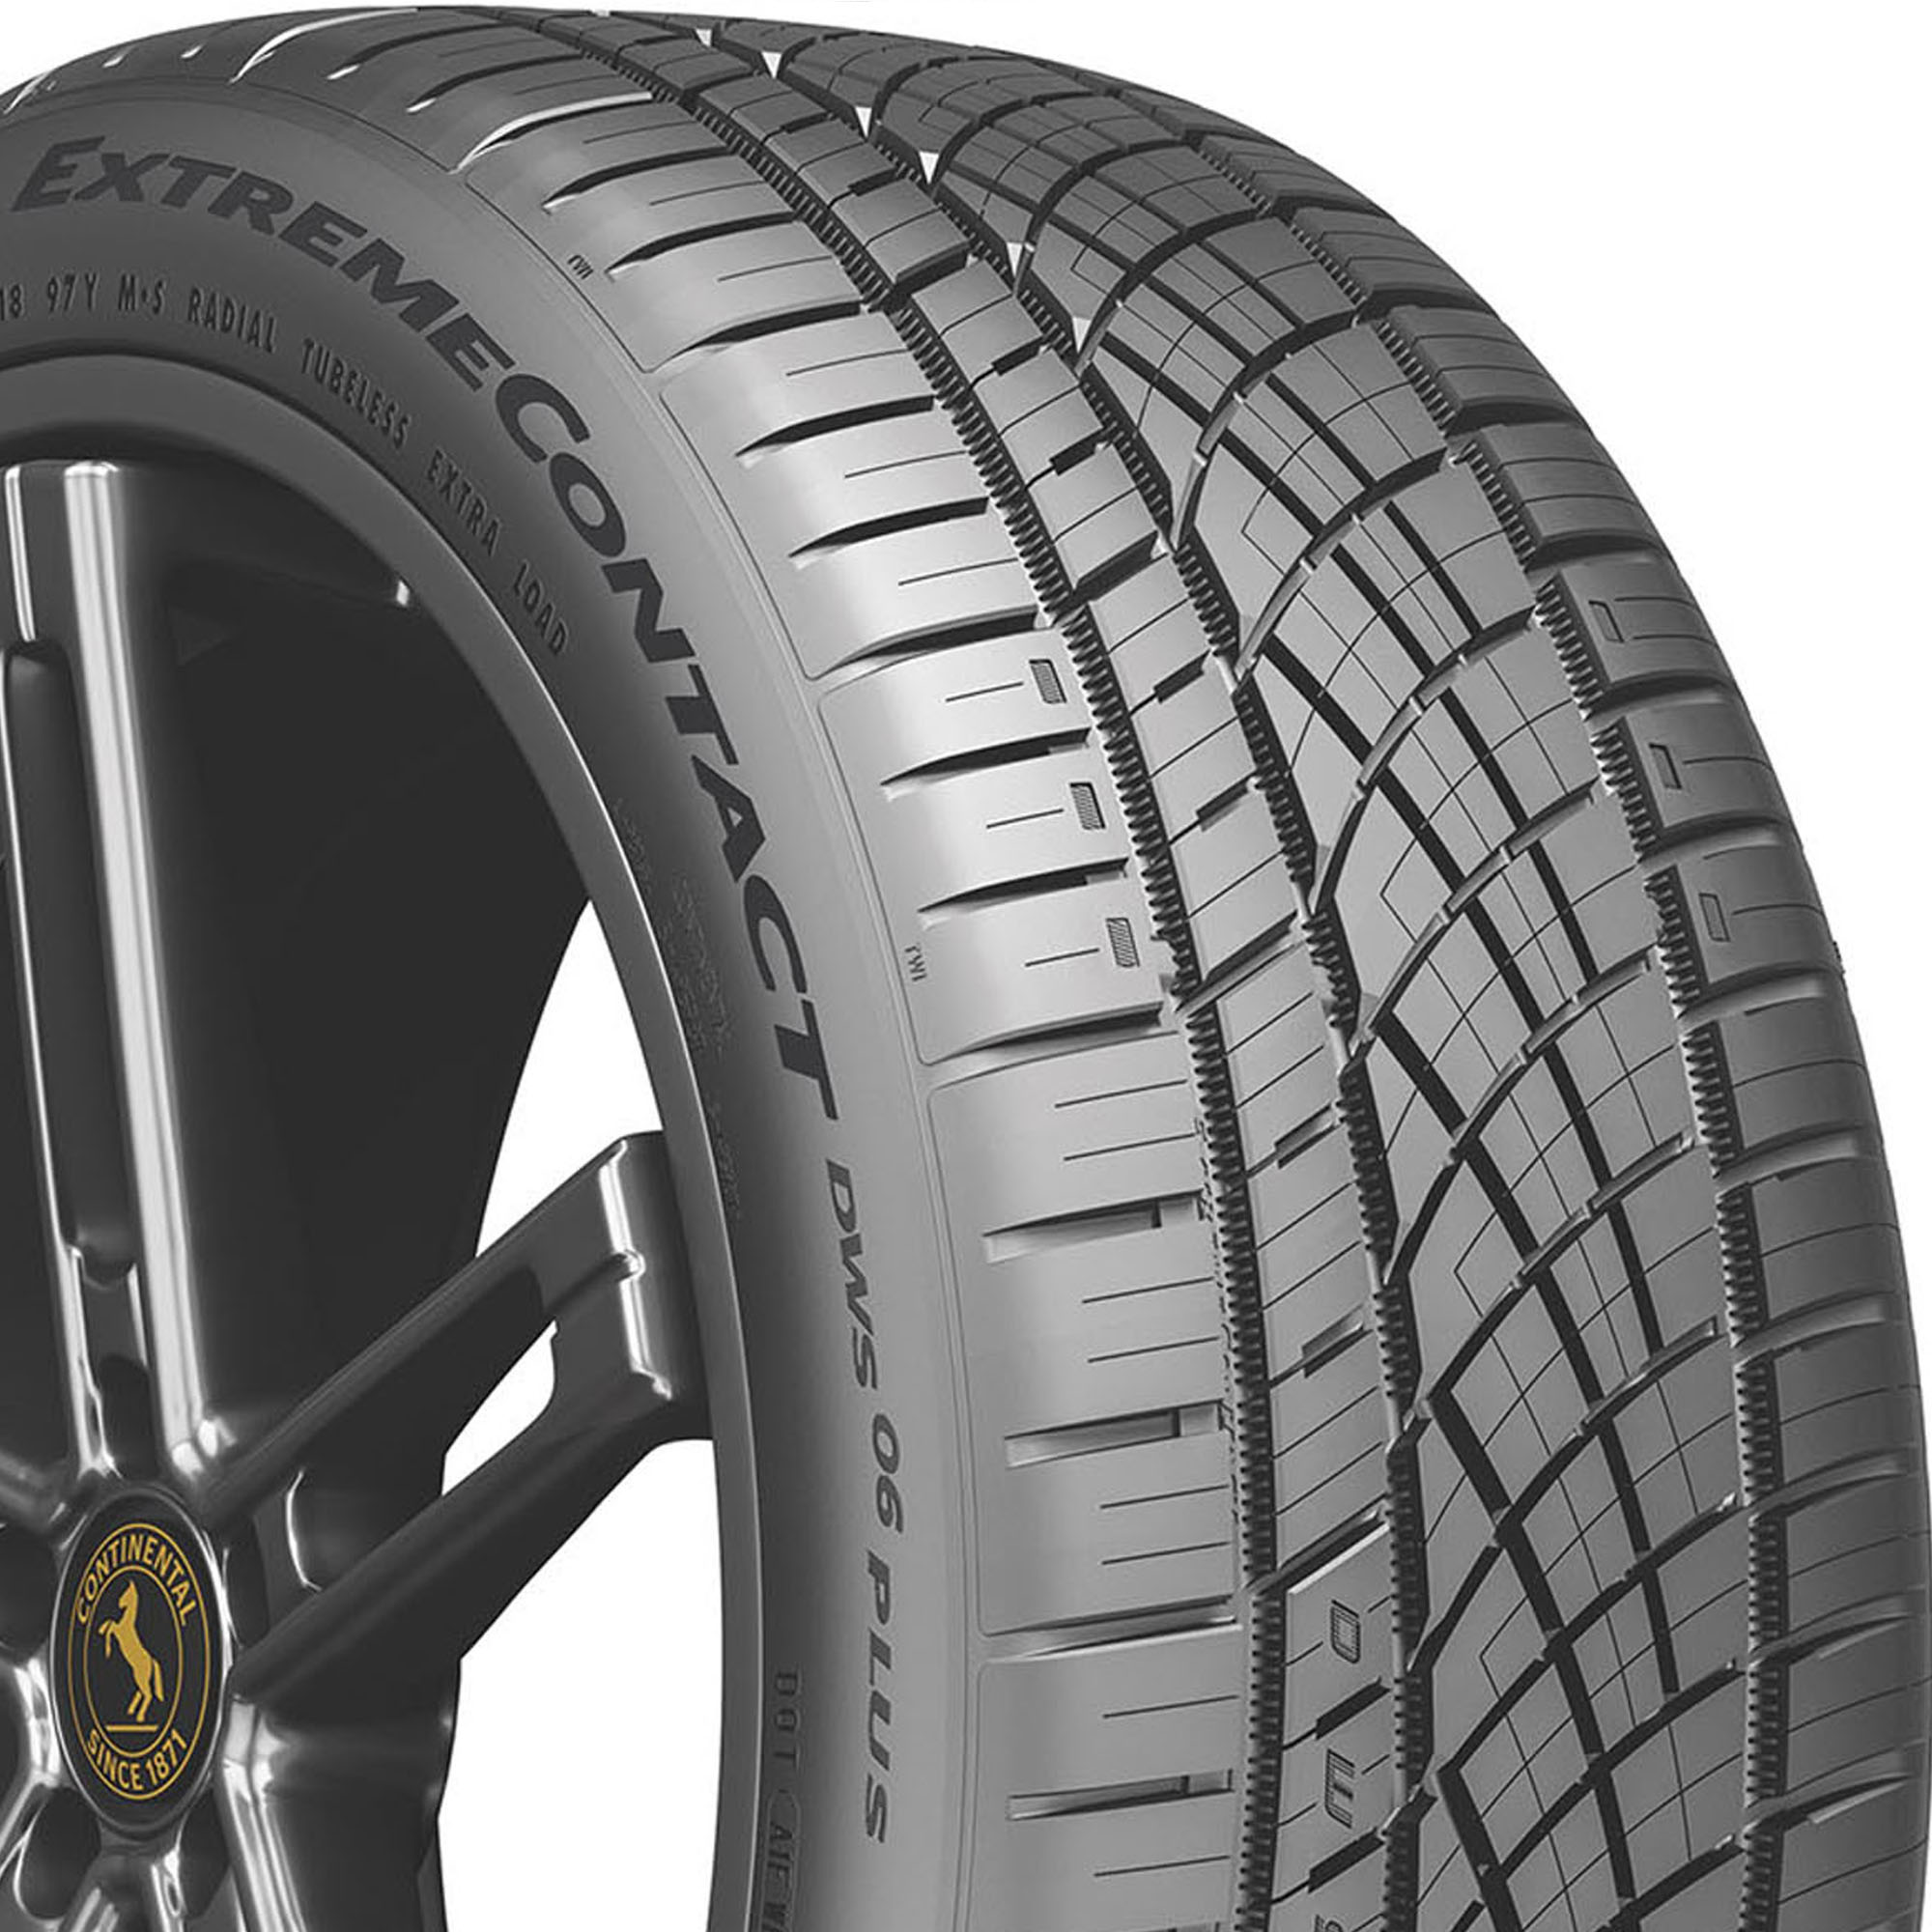 Continental ExtremeContact DWS06 PLUS All Season 255/45ZR18 103Y XL  Passenger Tire Fits: 2005-13 Toyota Tacoma X-Runner, 2007-10 Ford Mustang  Shelby GT500